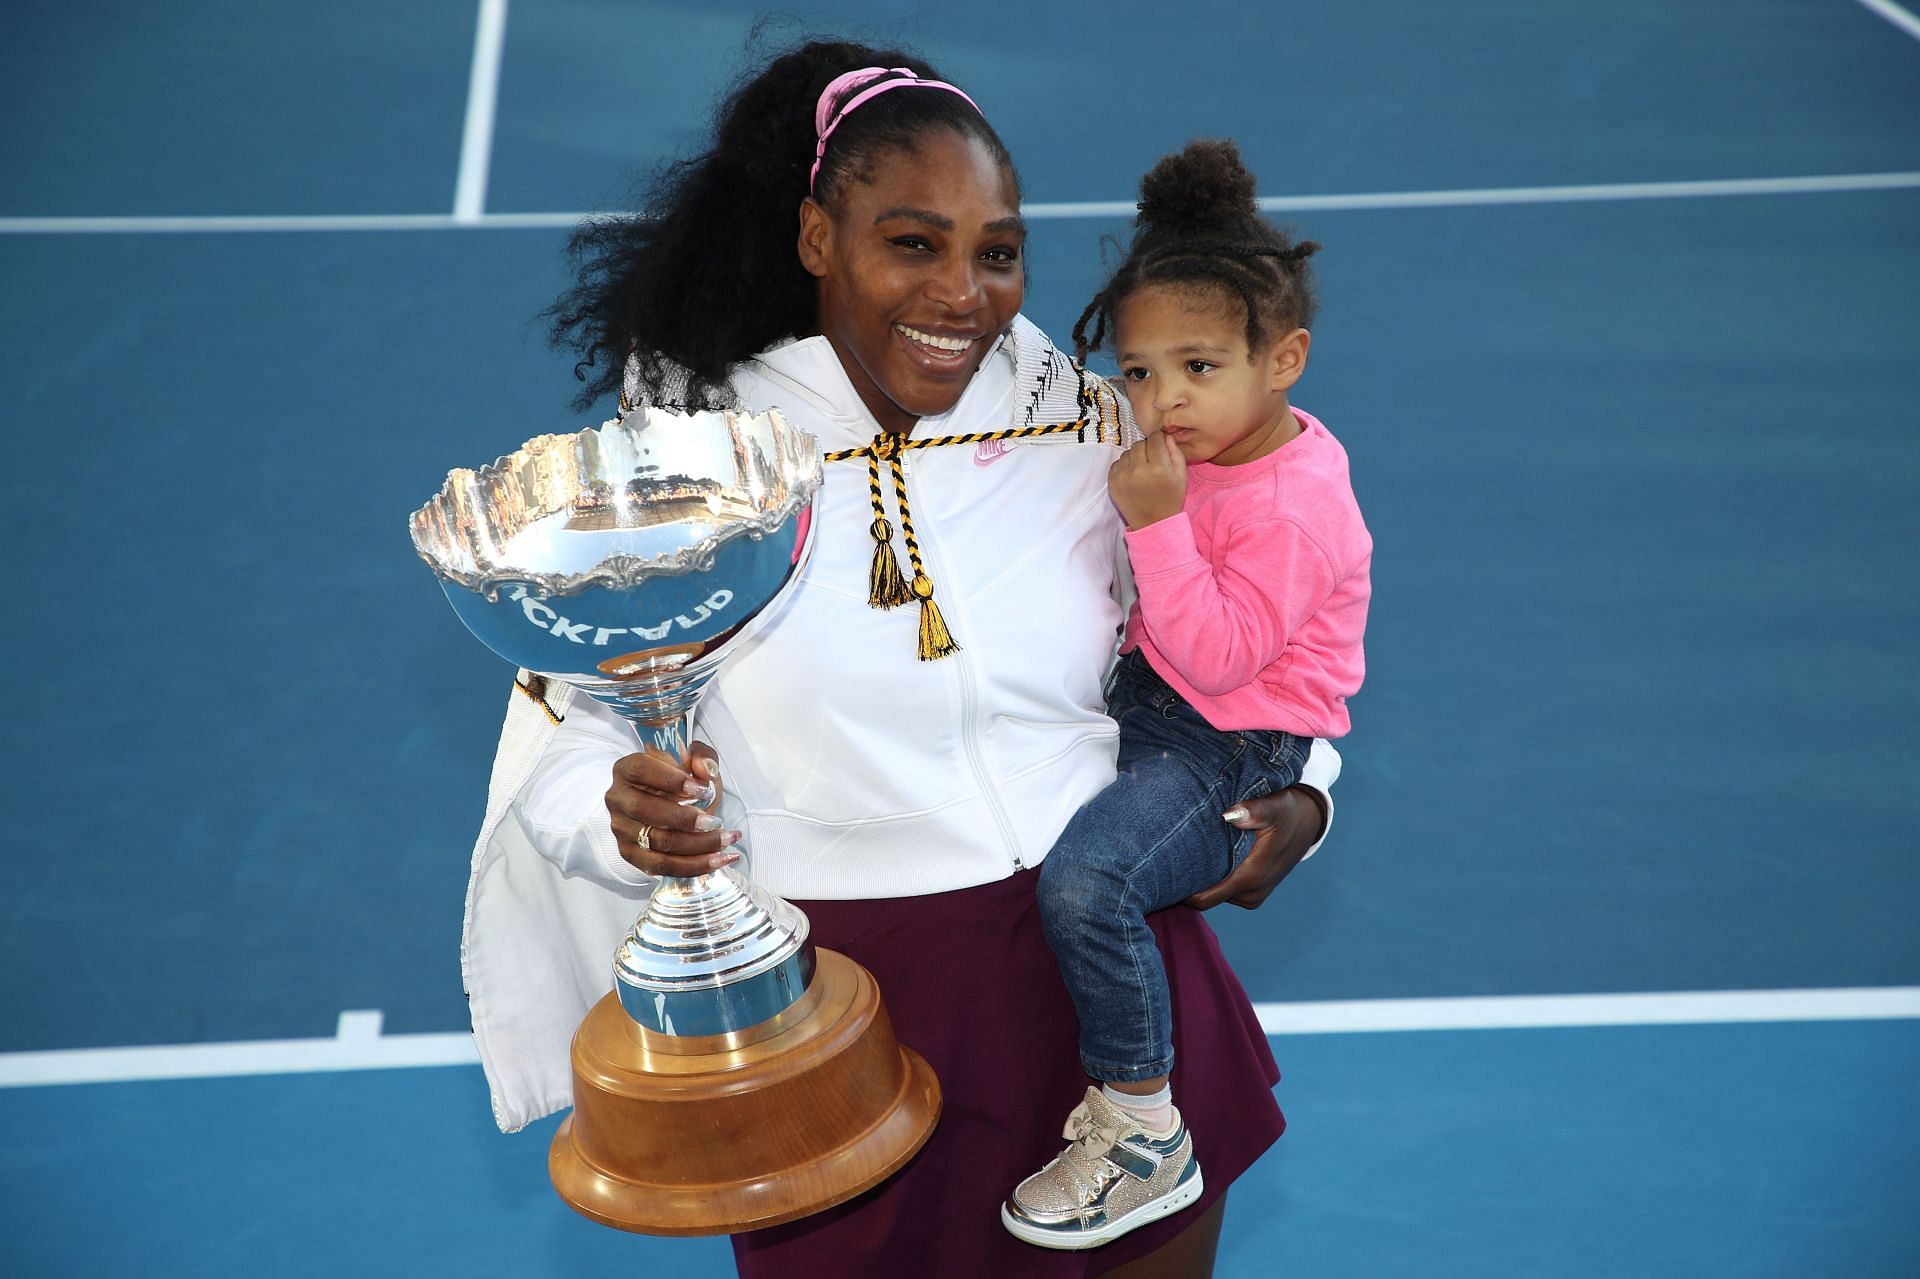 Serena Williams had to undergo a number of surgeries for blood clots following the birth of her daughter